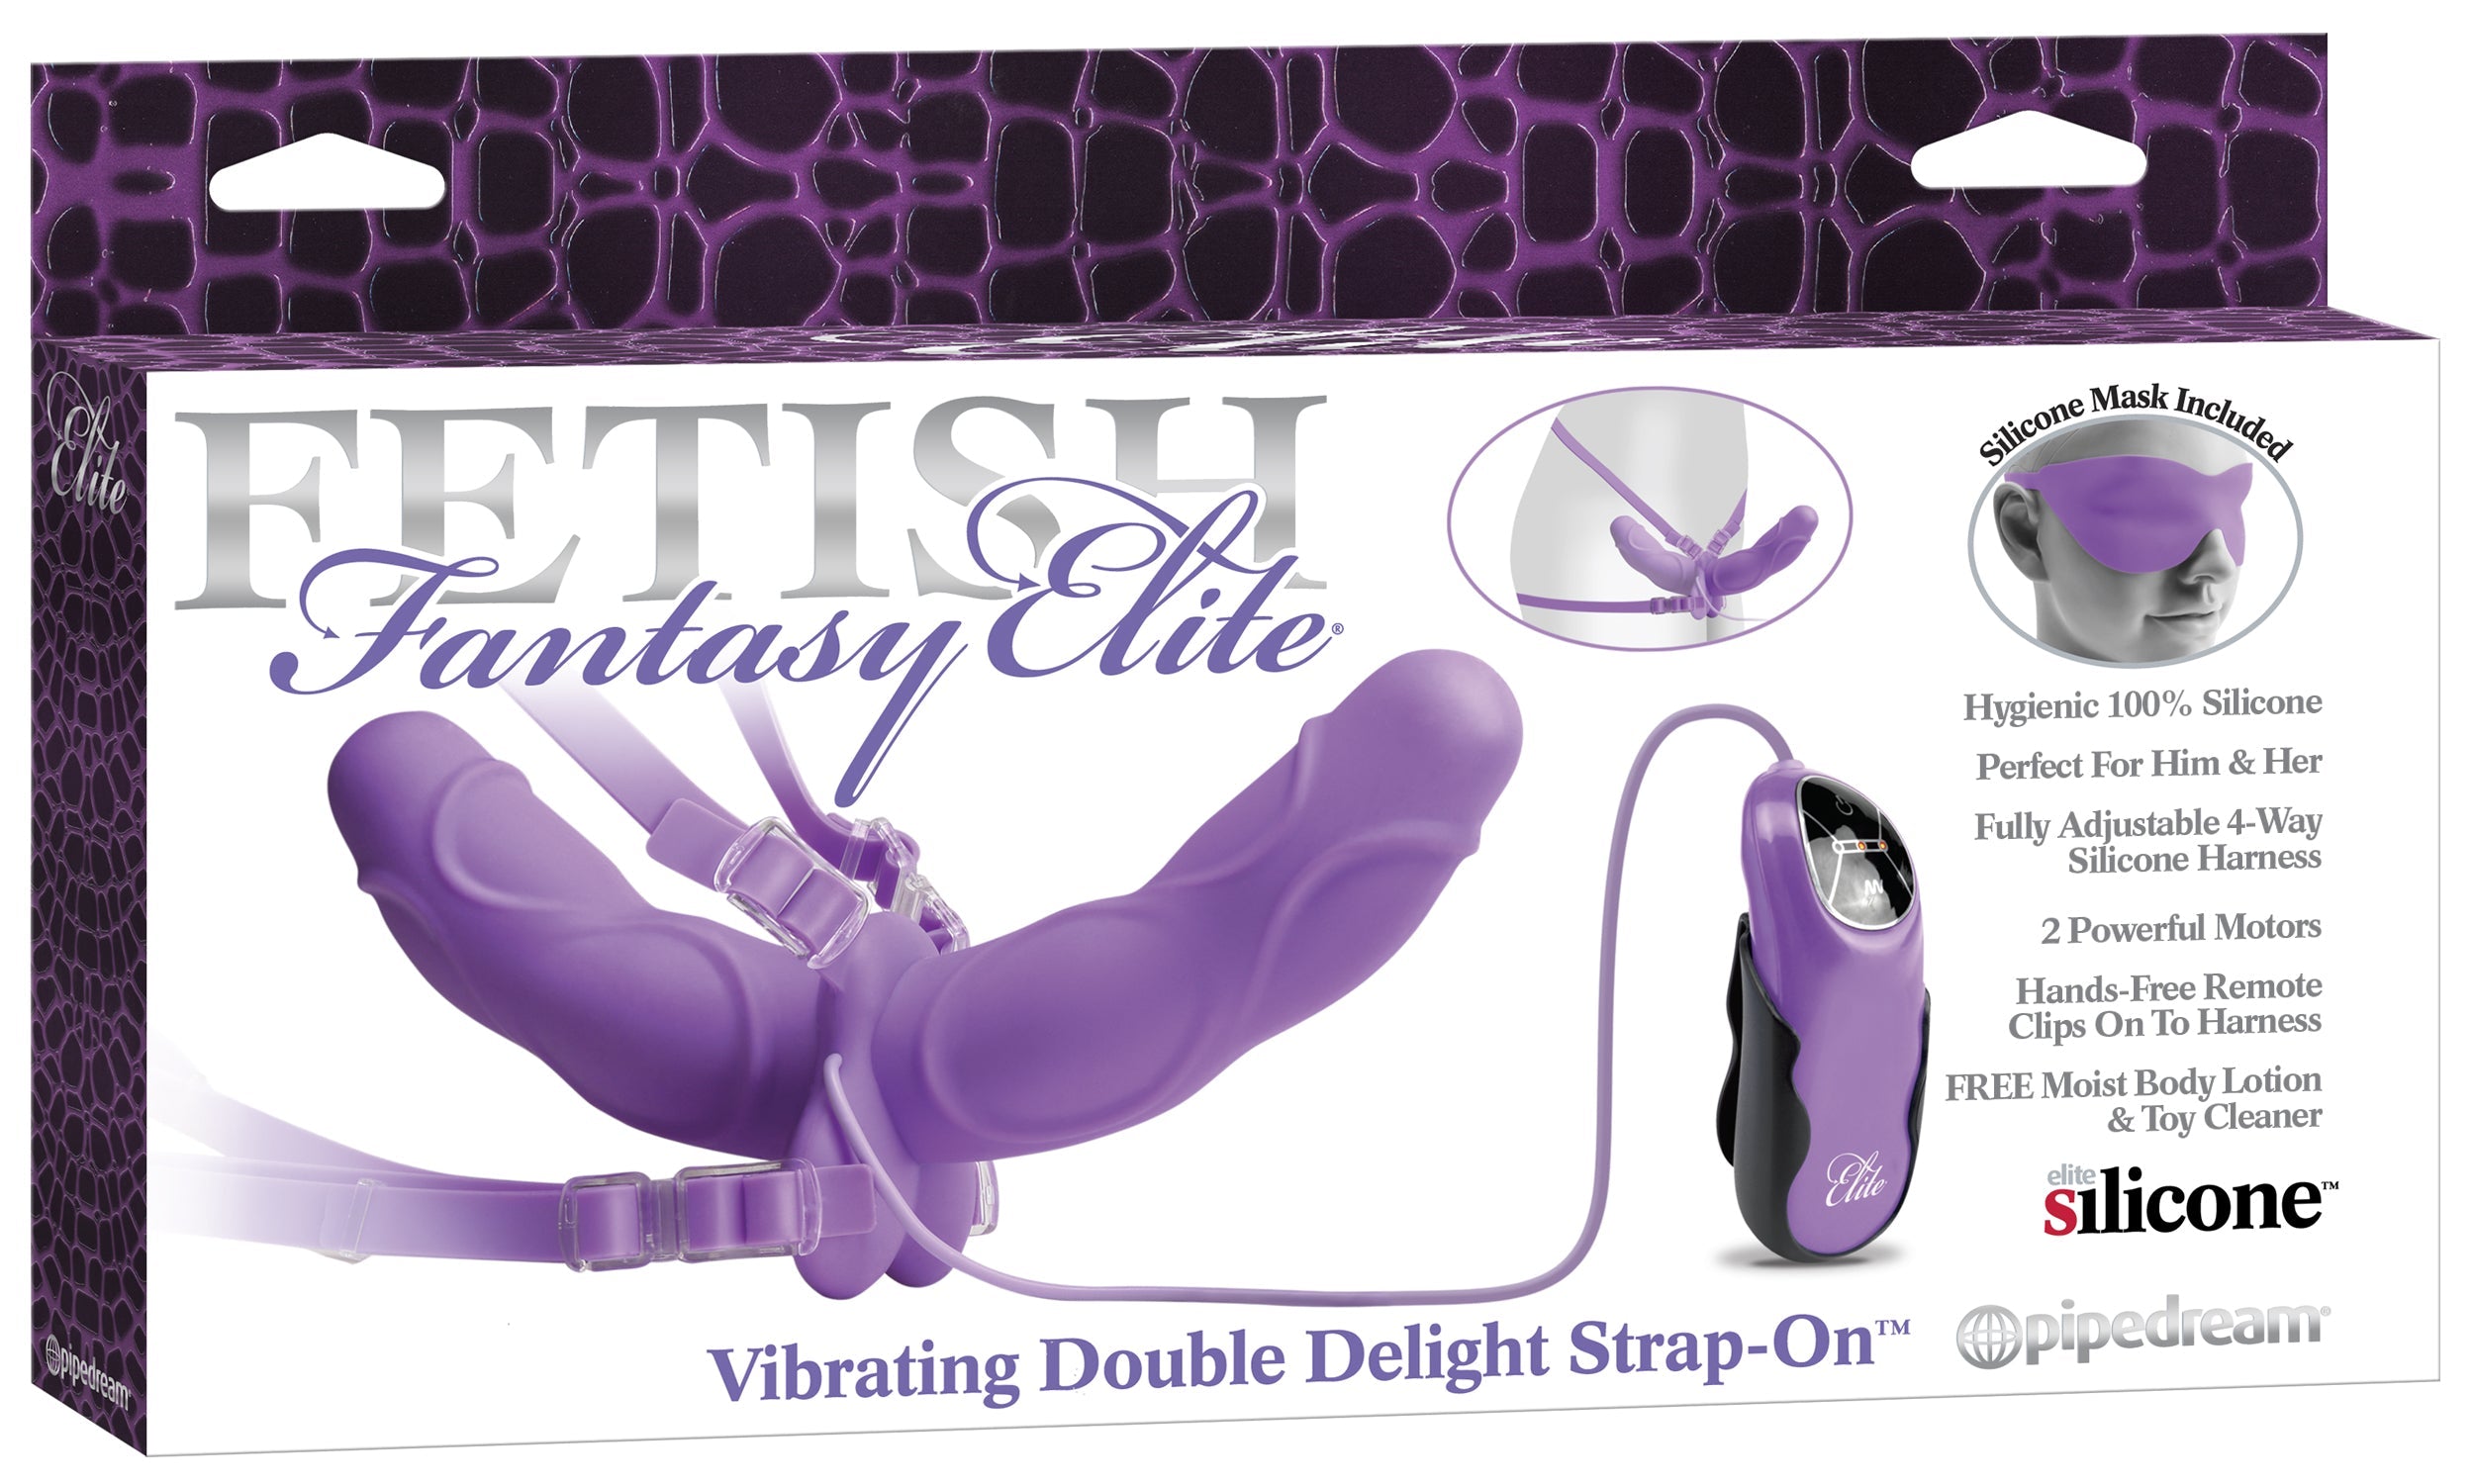 Pipedream Products Fetish Fantasy Elite Vibrating Double Delight Strap-On-Vibrators-Pipedream Products-XOXTOYS